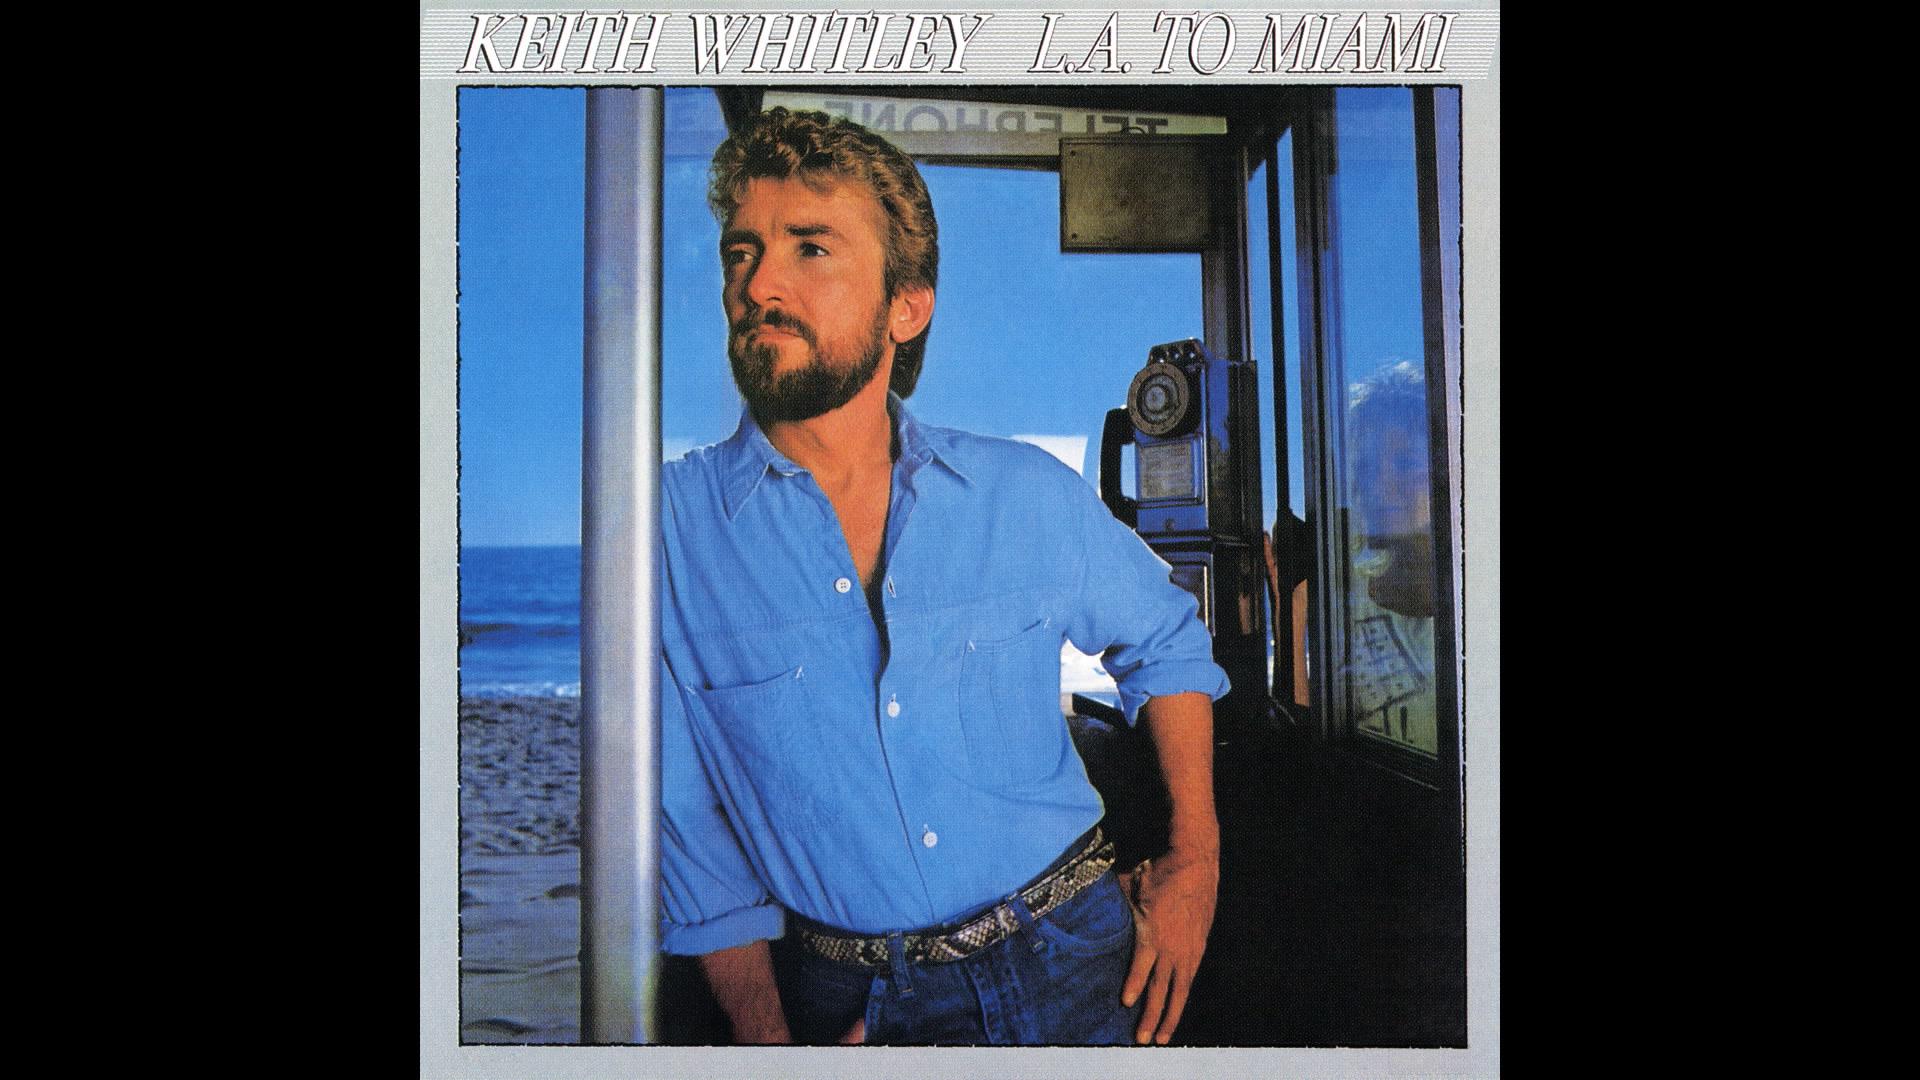 Keith Whitley - Miami, My Amy (Official Audio)